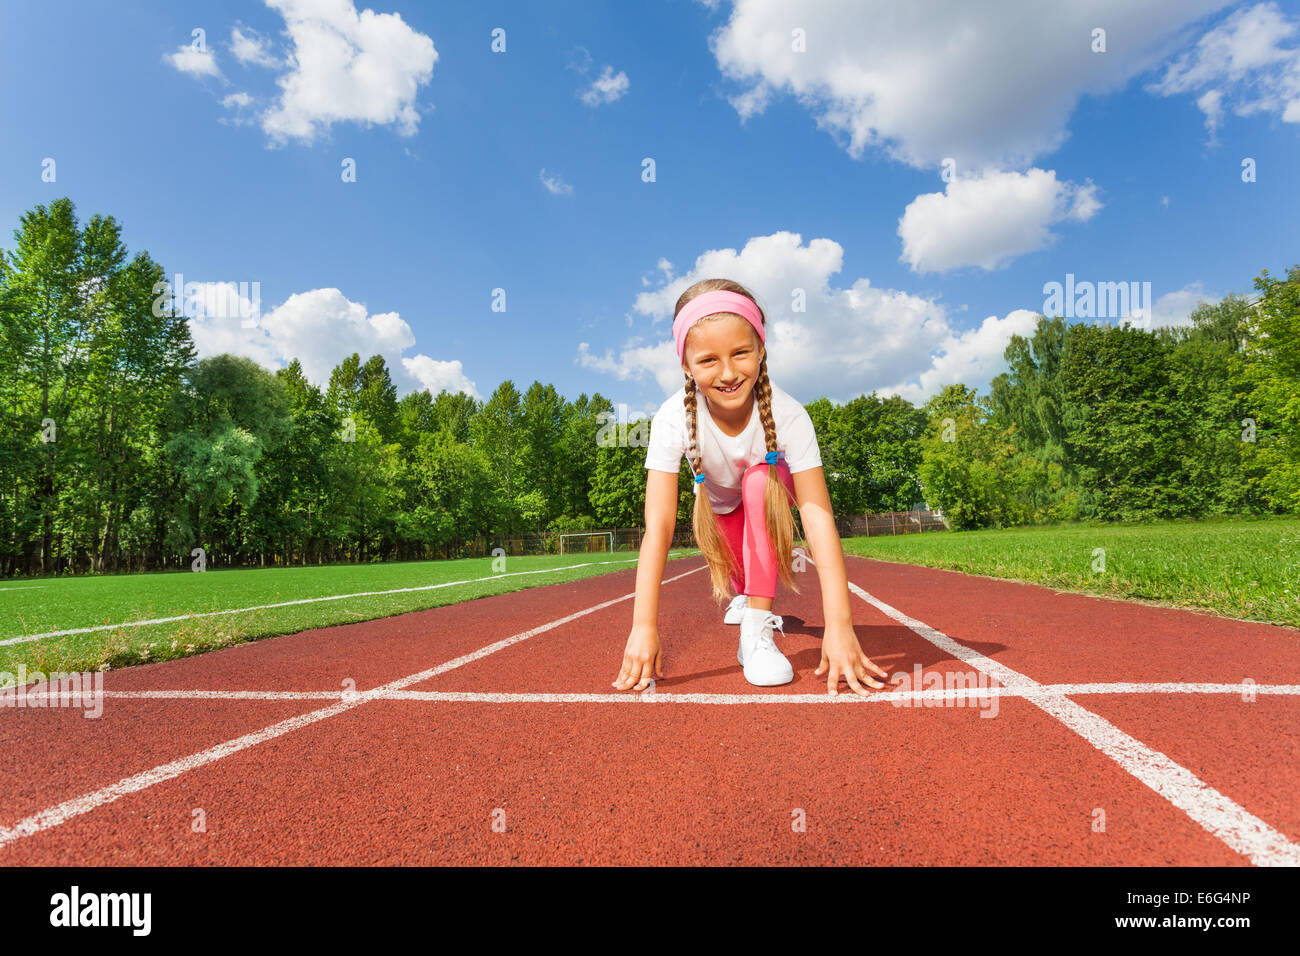 Girl in ready position on bend knee to run Stock Photo